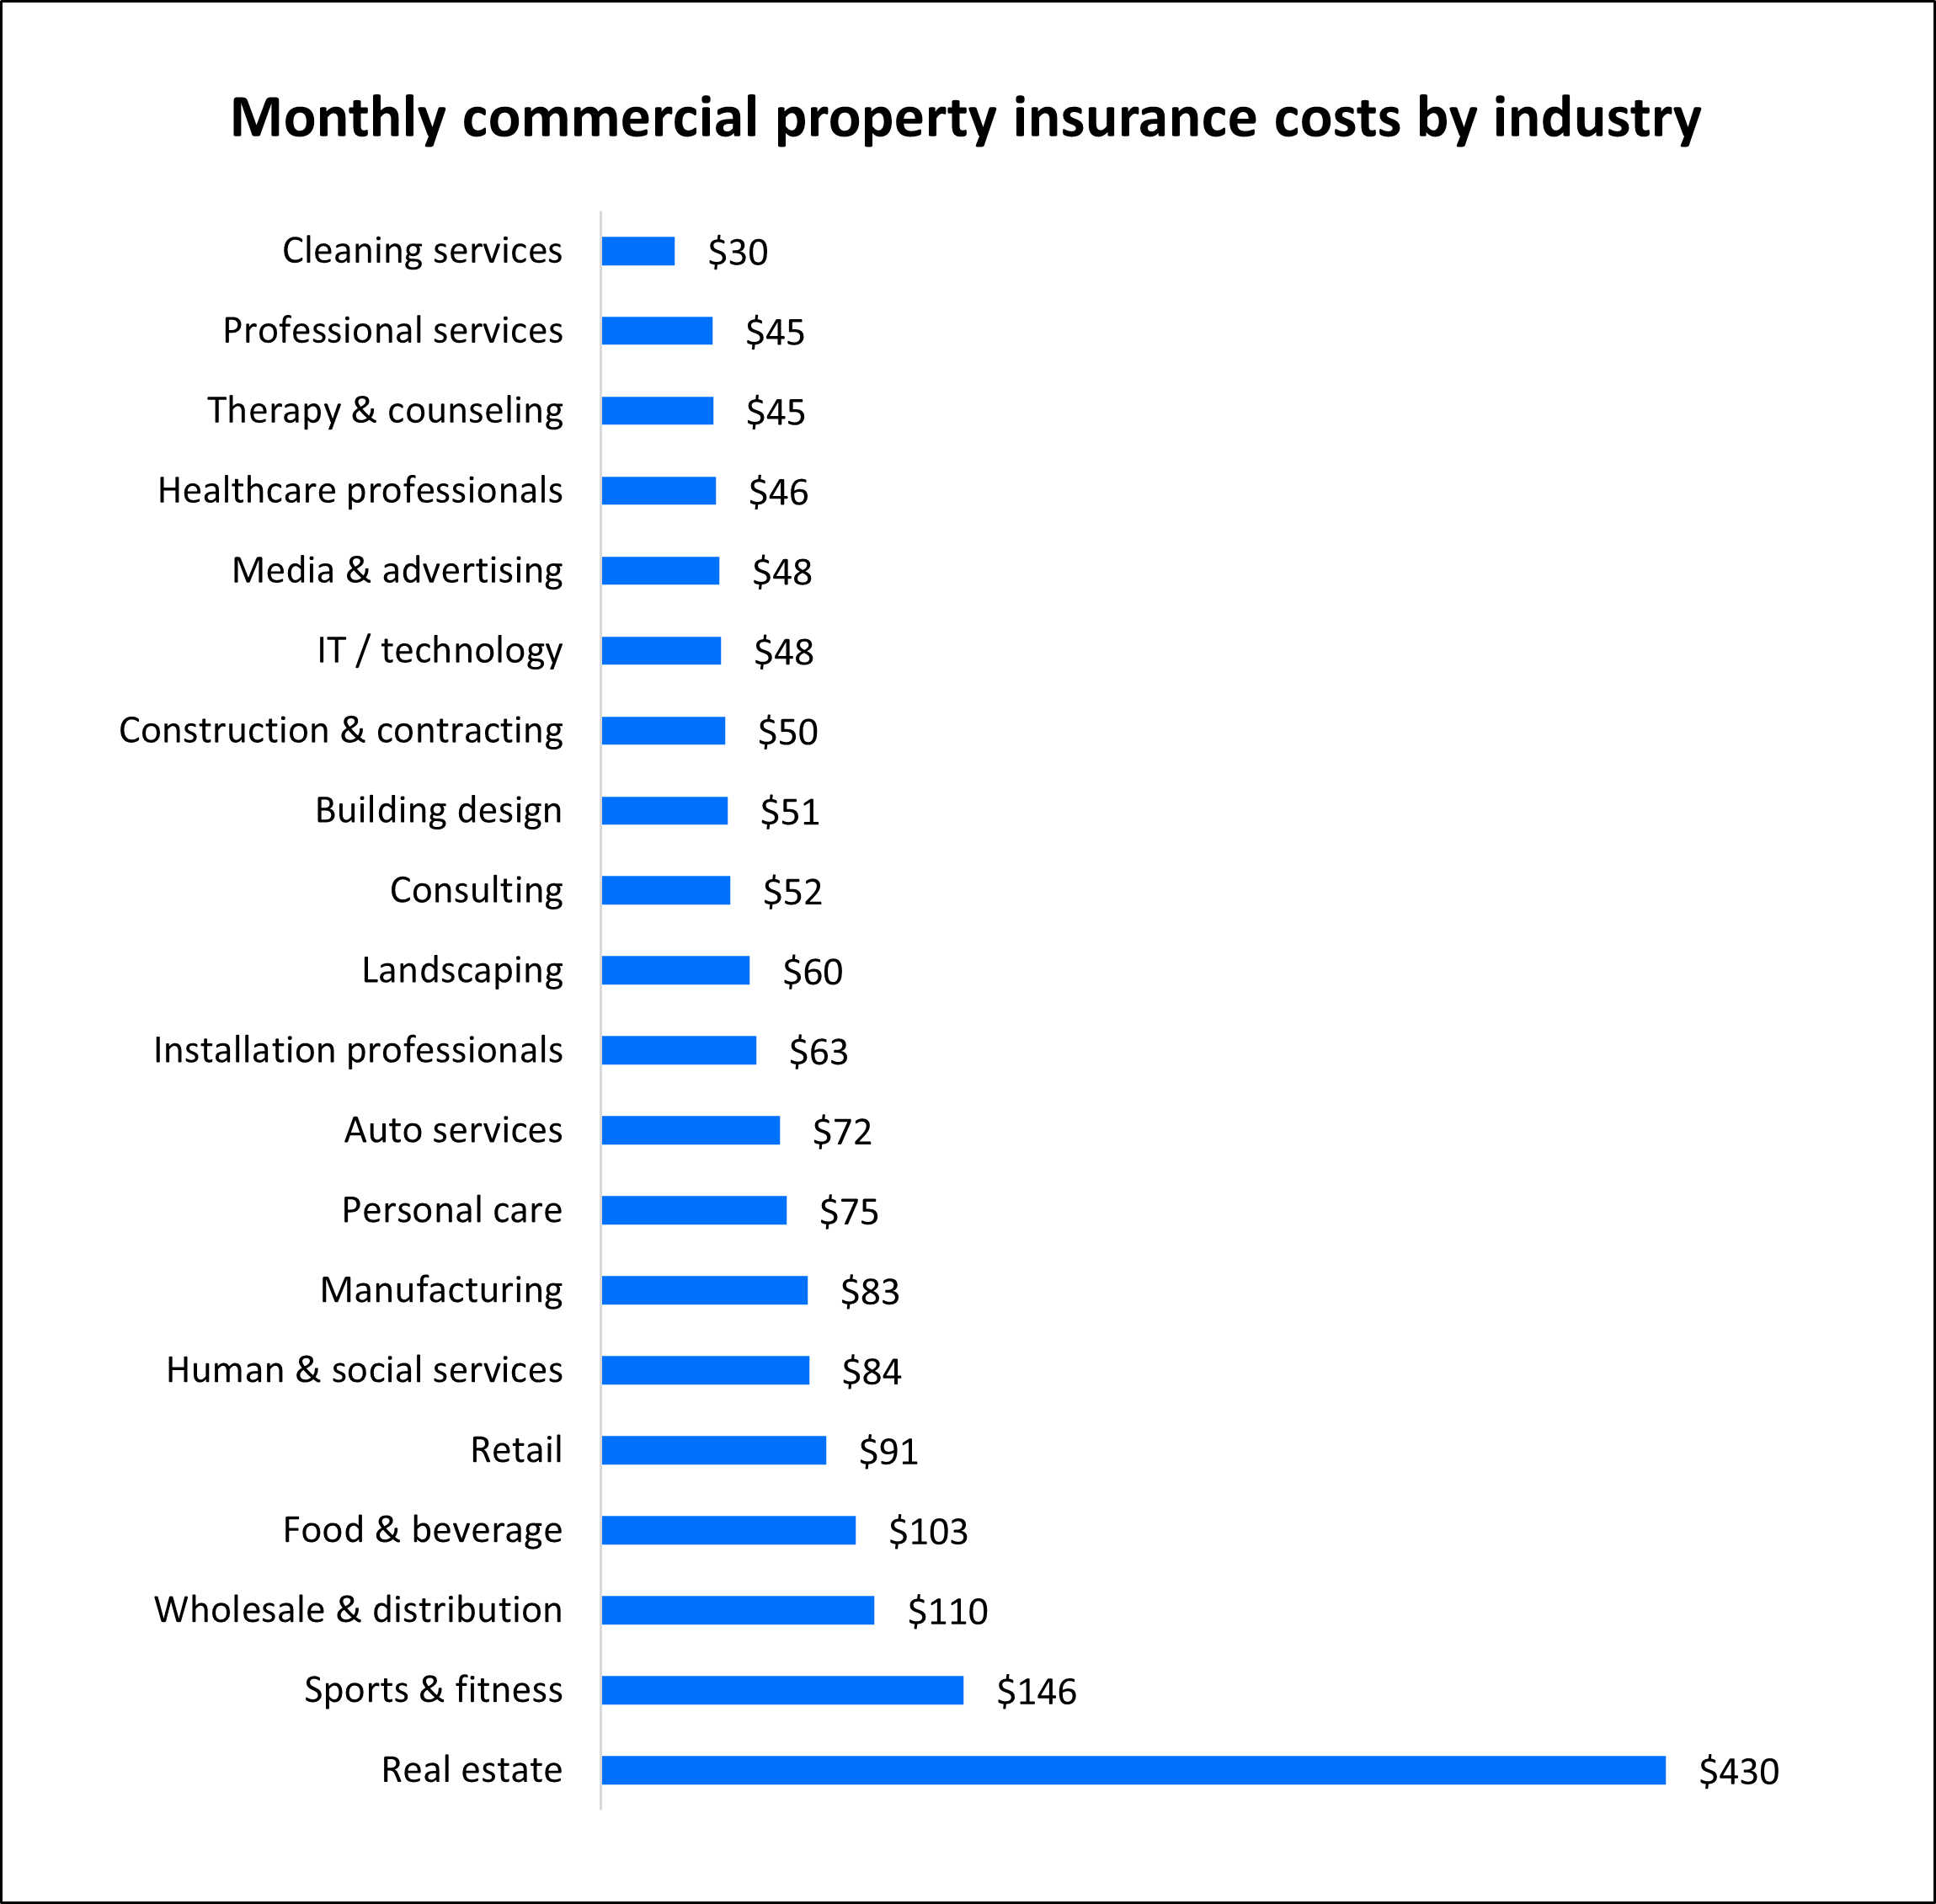 Monthly commercial property insurance costs by industry